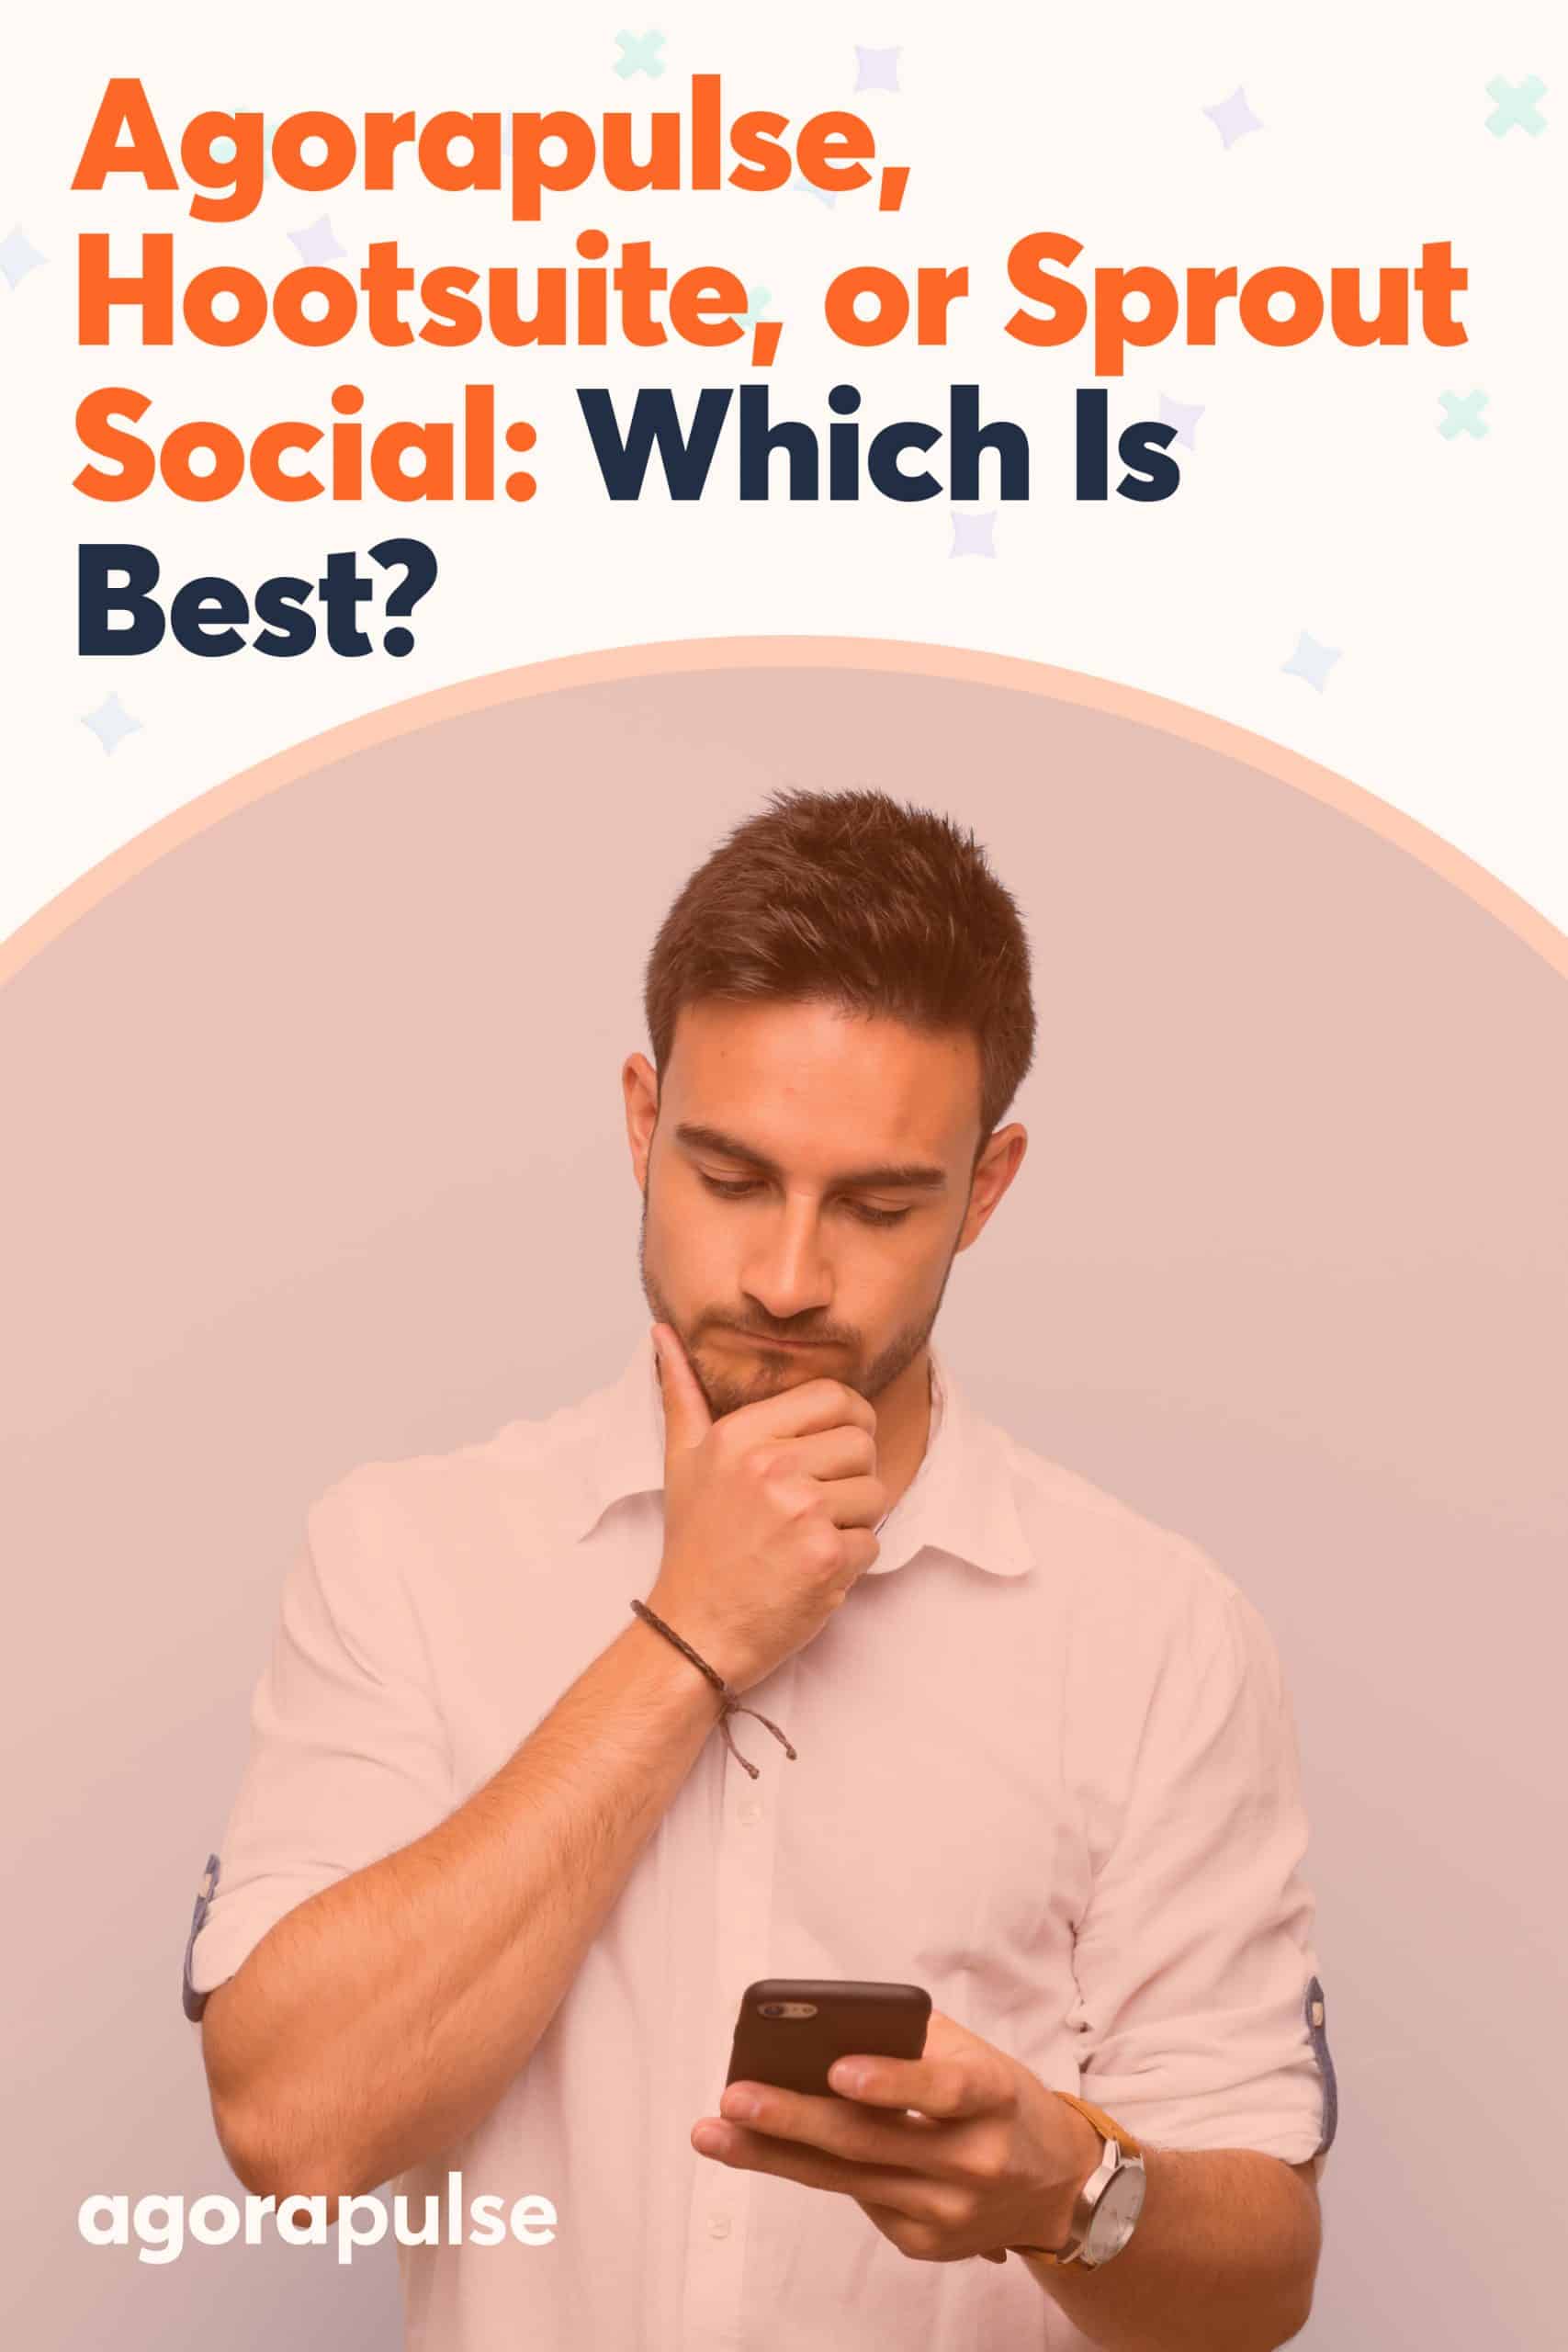 Agorapulse vs Hootsuite vs. Sprout Social: Which Should You Pick for Your Social Media Management Needs?